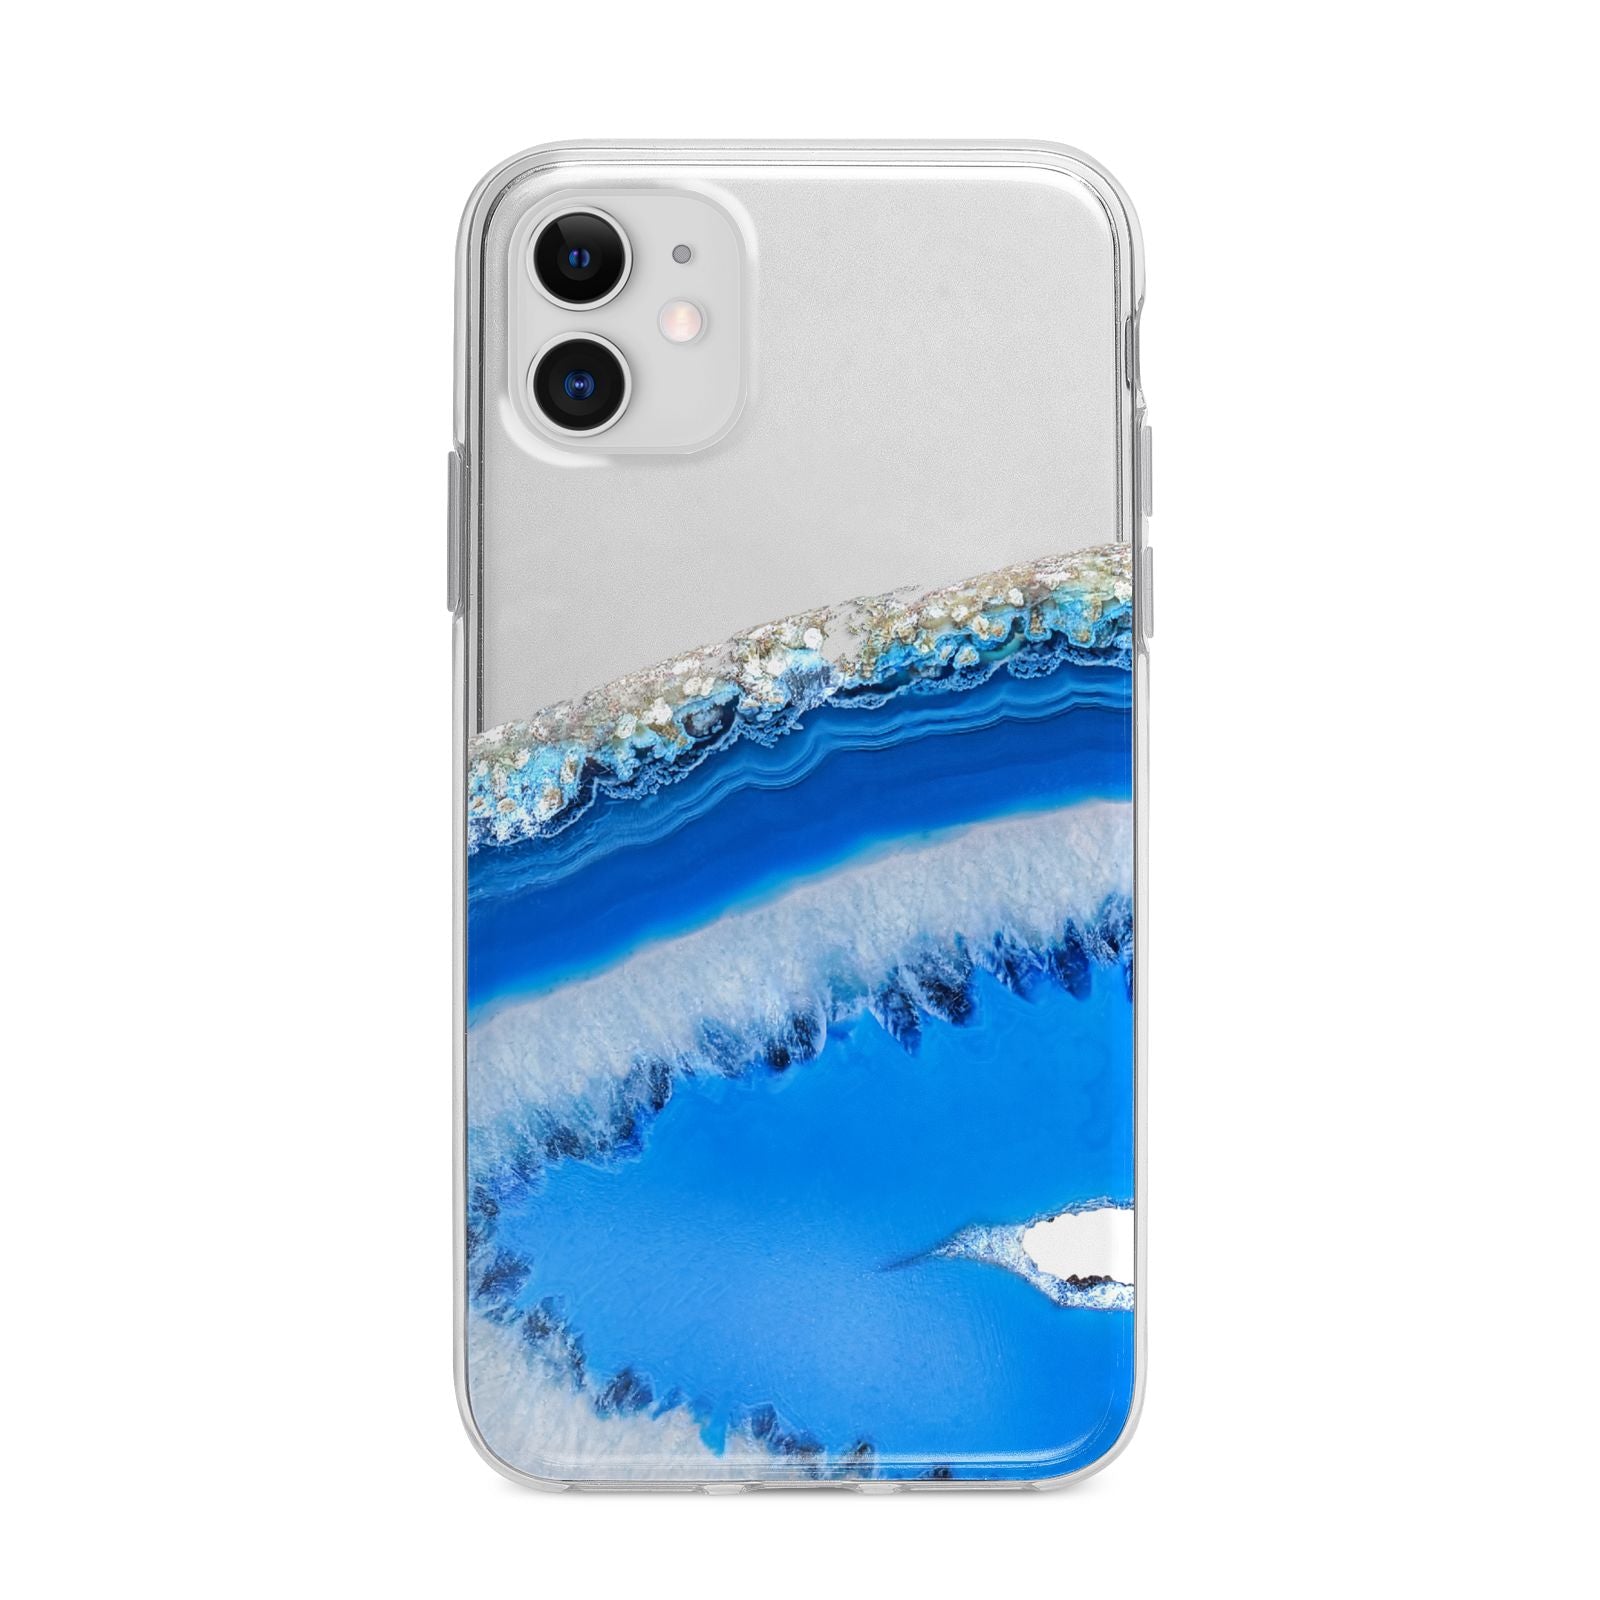 Agate Blue Apple iPhone 11 in White with Bumper Case